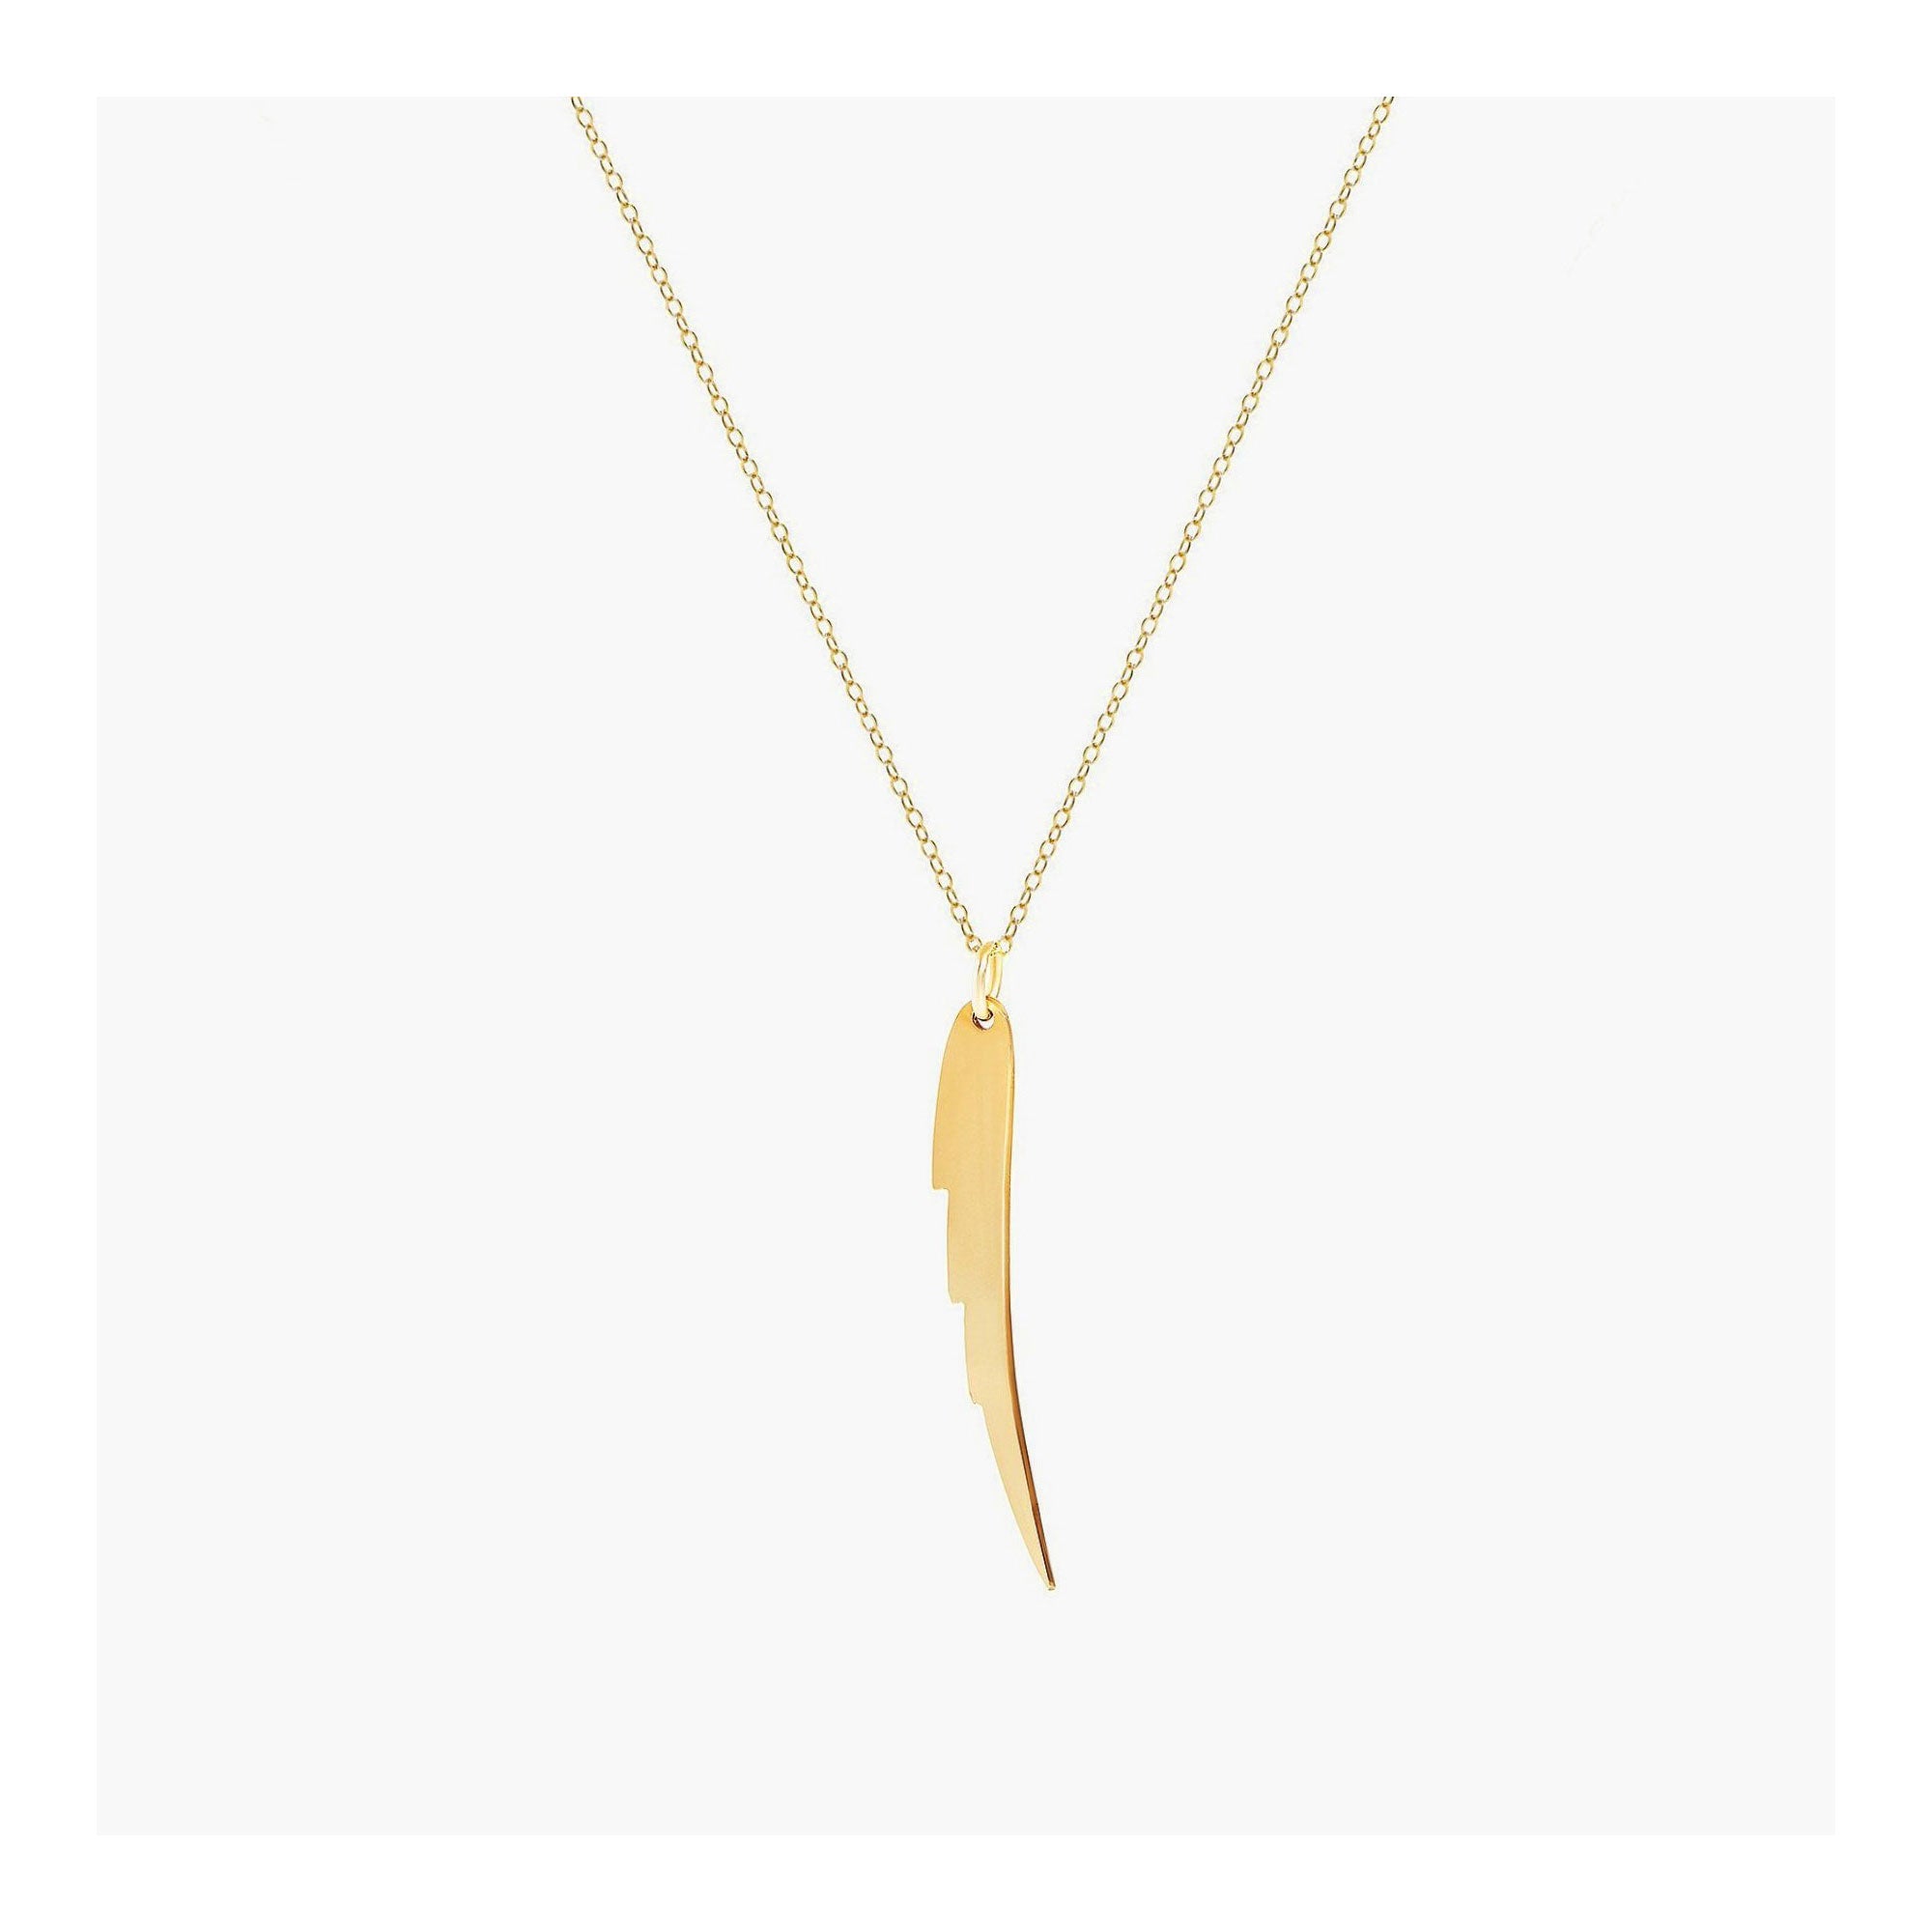 Angel wing necklace gold